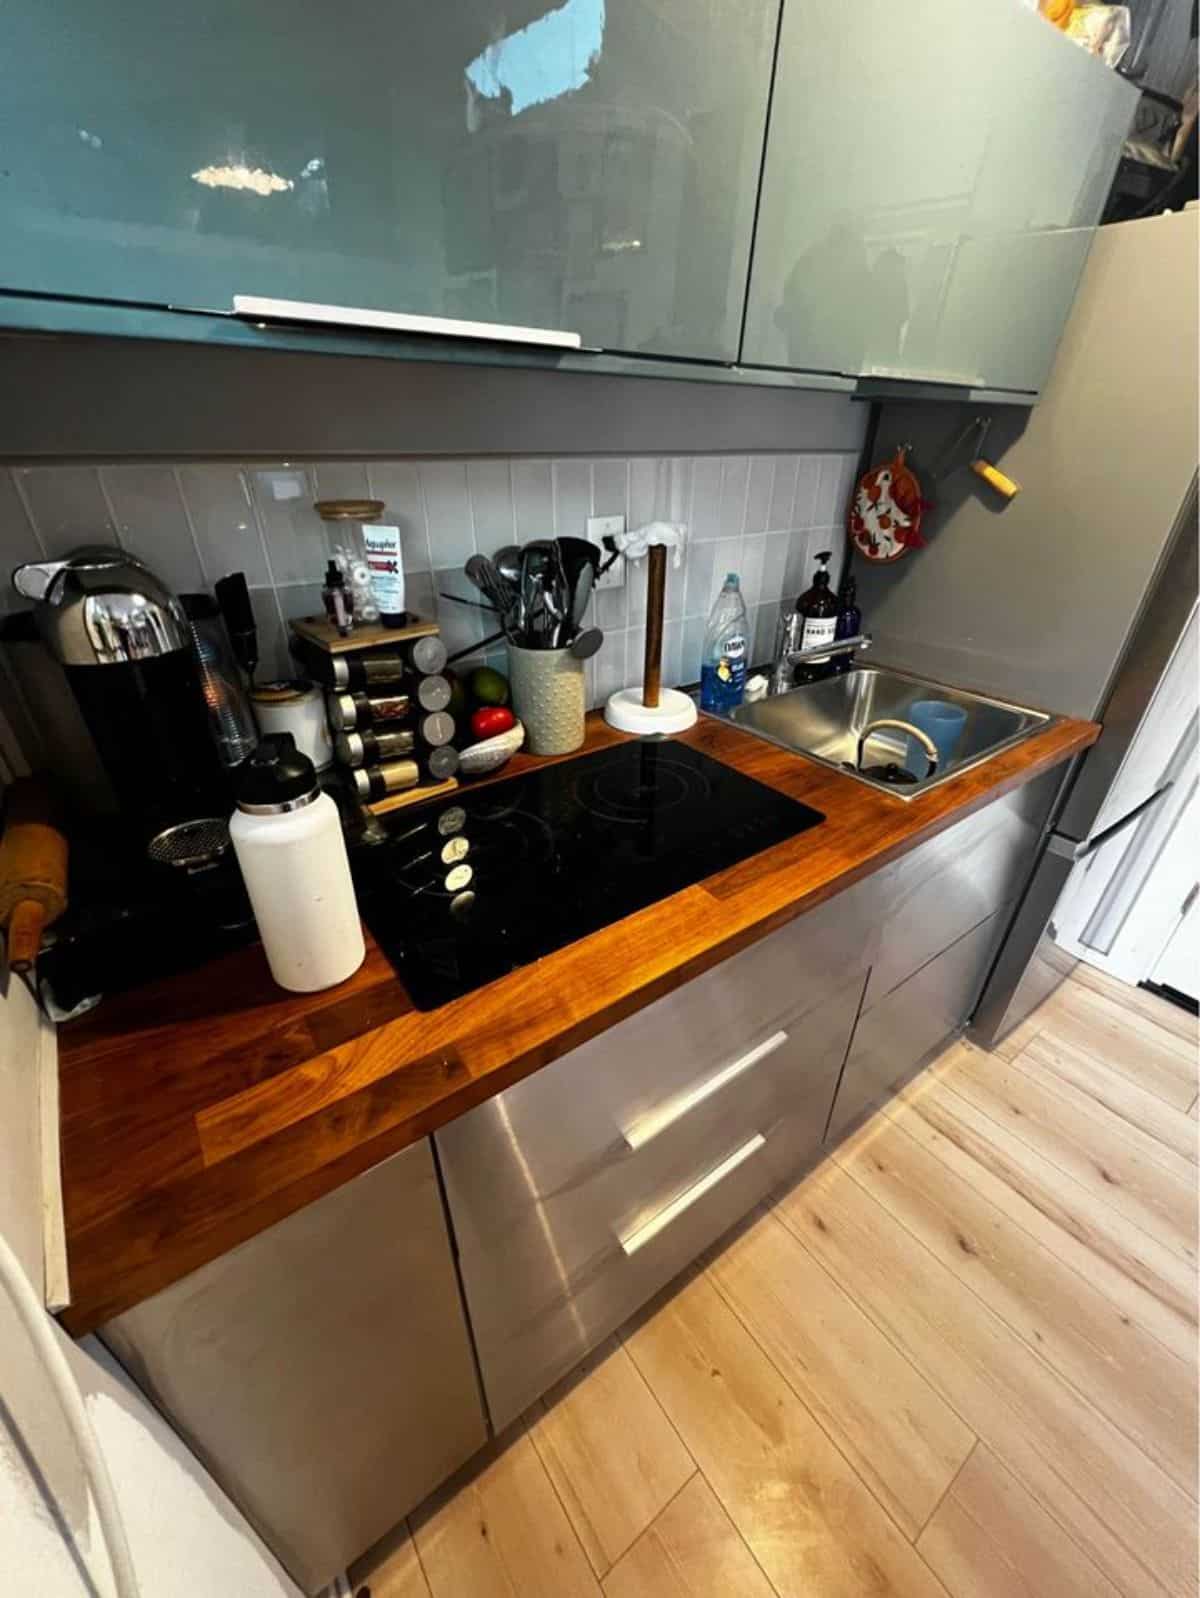 compact yet fully packed kitchen area